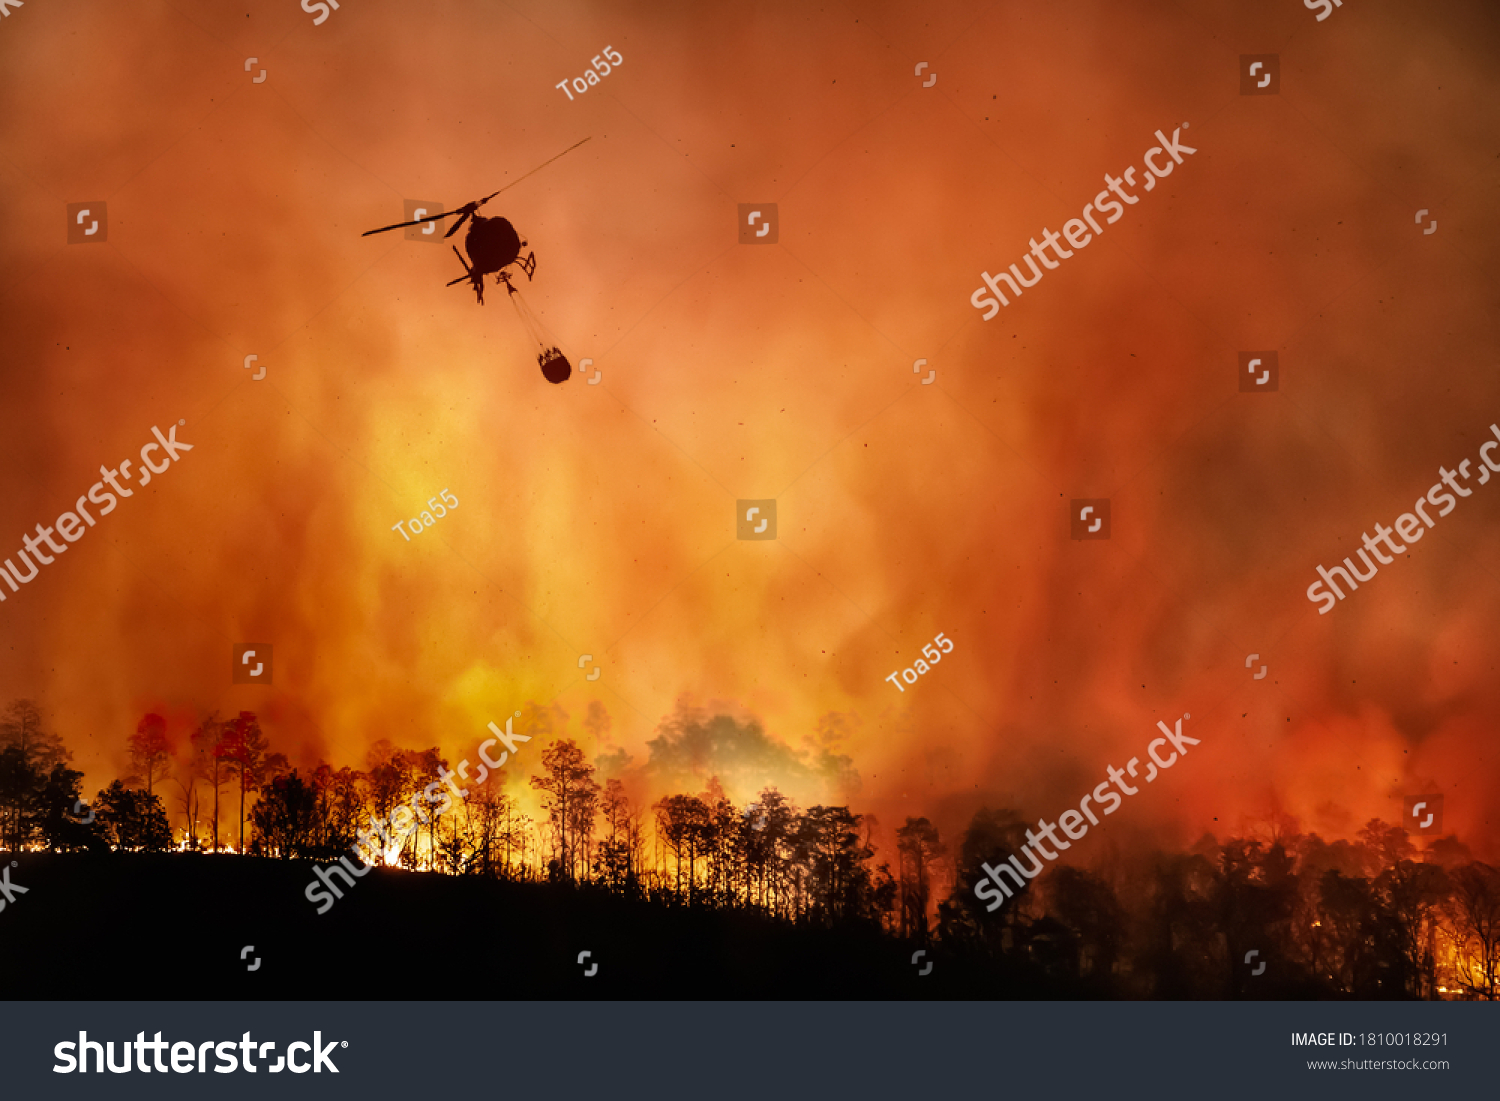 Fire fighting helicopter carry water bucket to extinguish the forest fire #1810018291